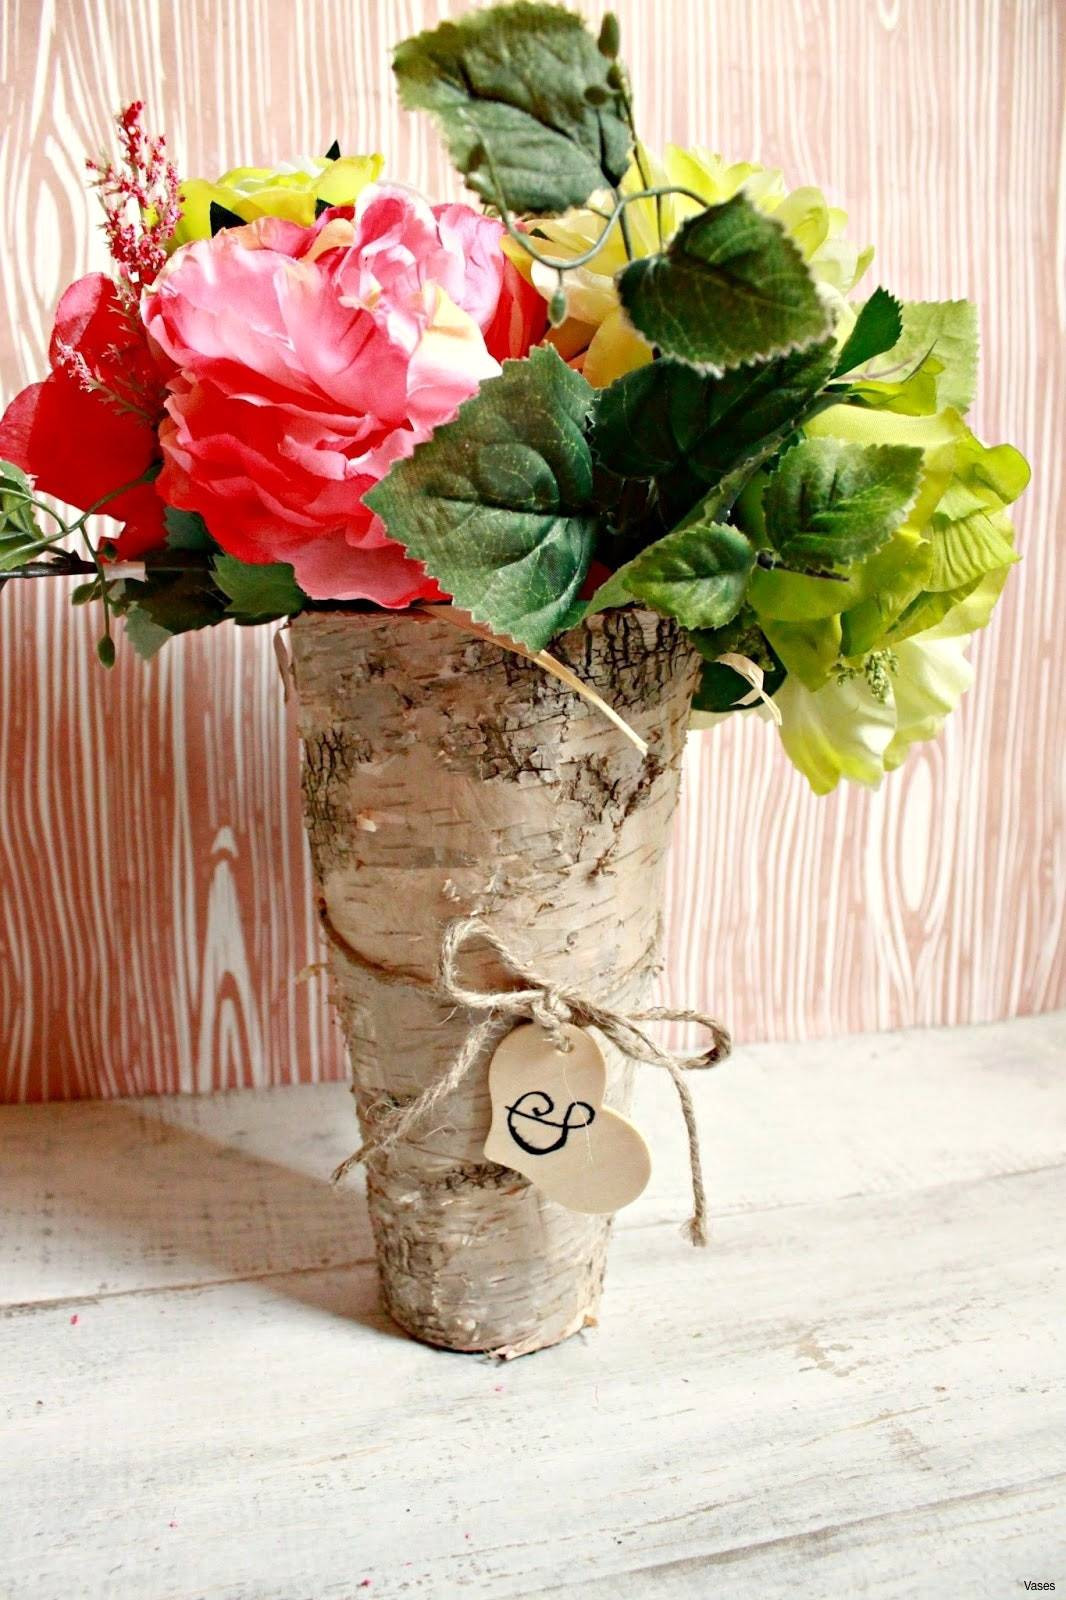 24 Stylish Red Flowers In Vase 2024 free download red flowers in vase of red table decorations for weddings new flowers and decorations for in red table decorations for weddings new flowers and decorations for weddings h vases diy wood vase